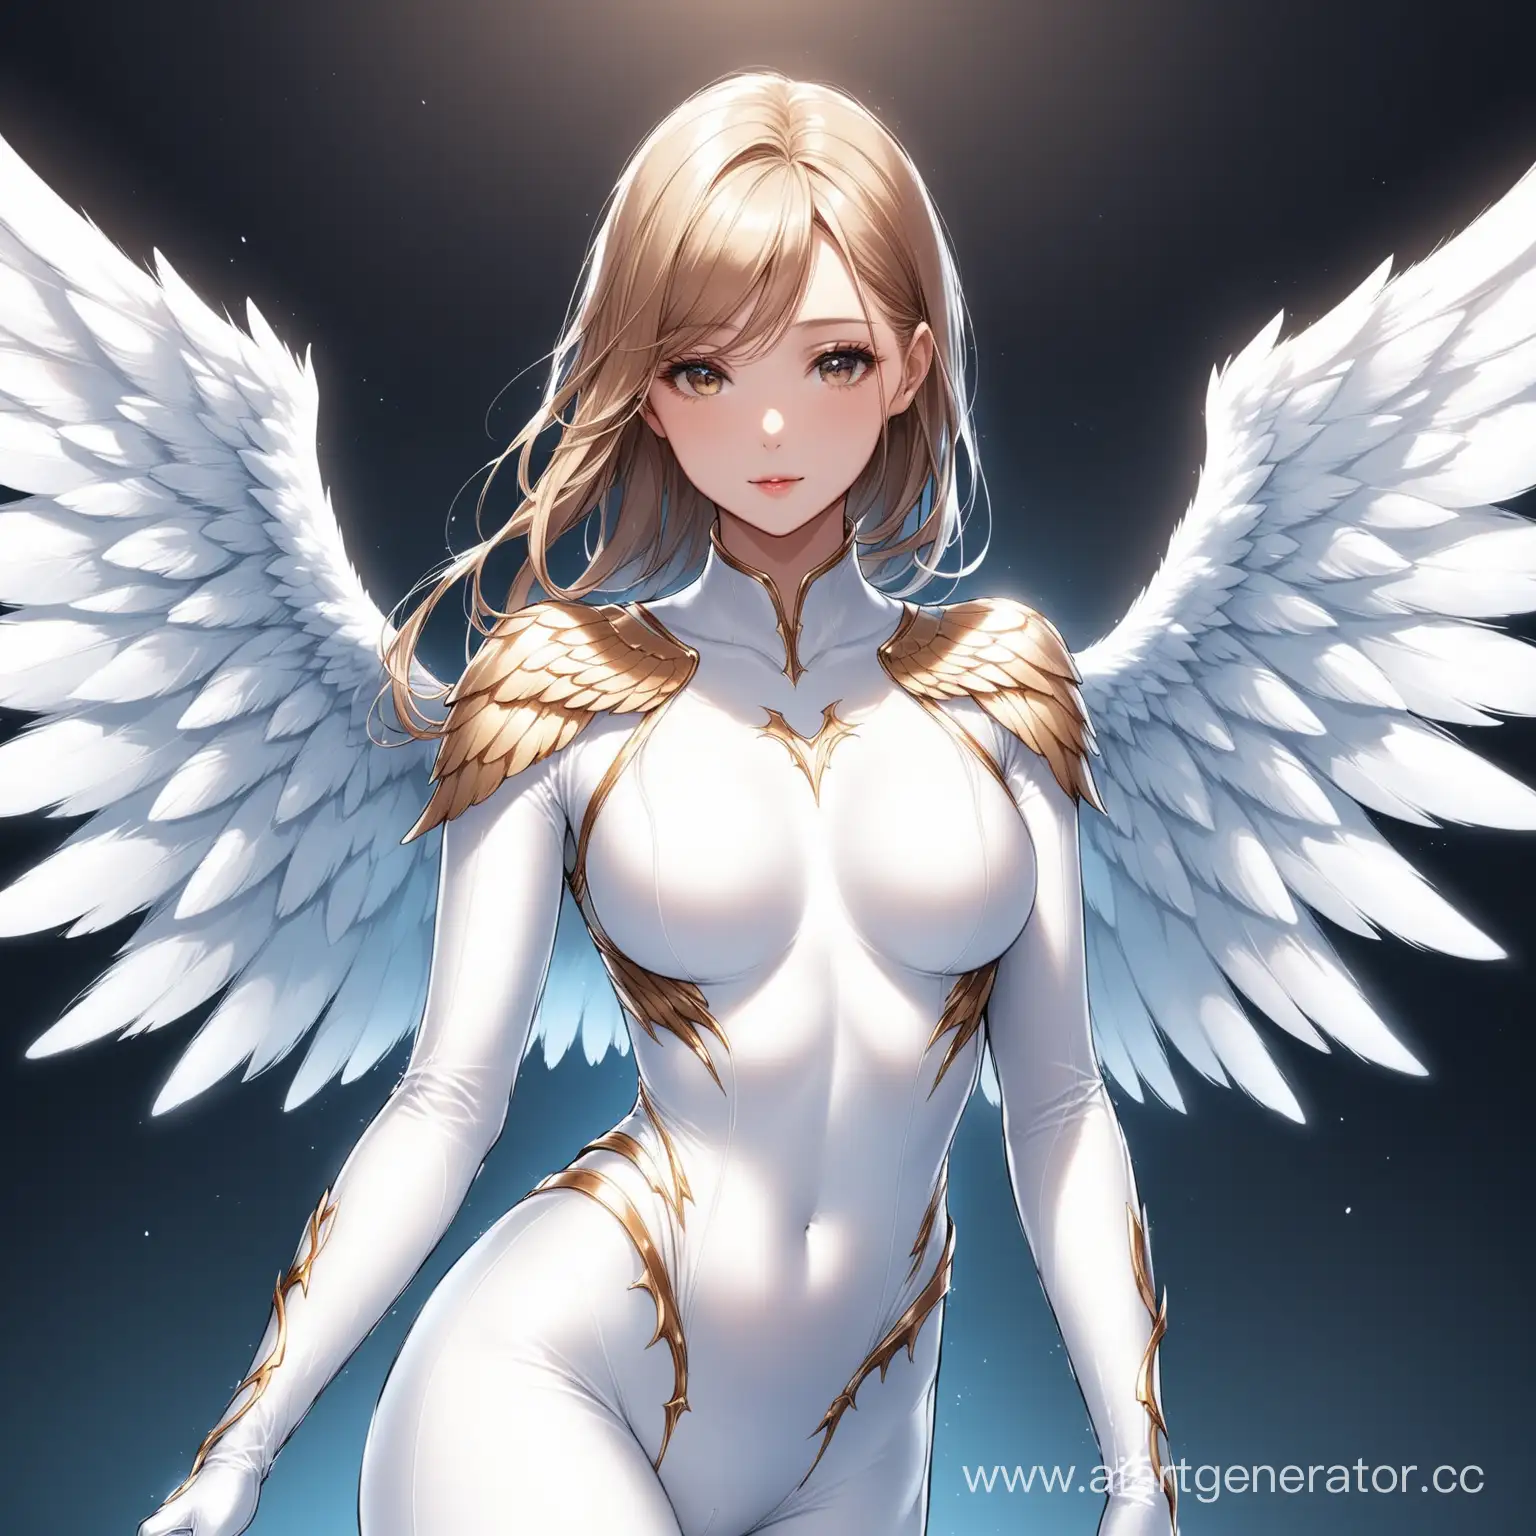 Graceful-Lady-in-White-Bodysuit-with-Angelic-Wings